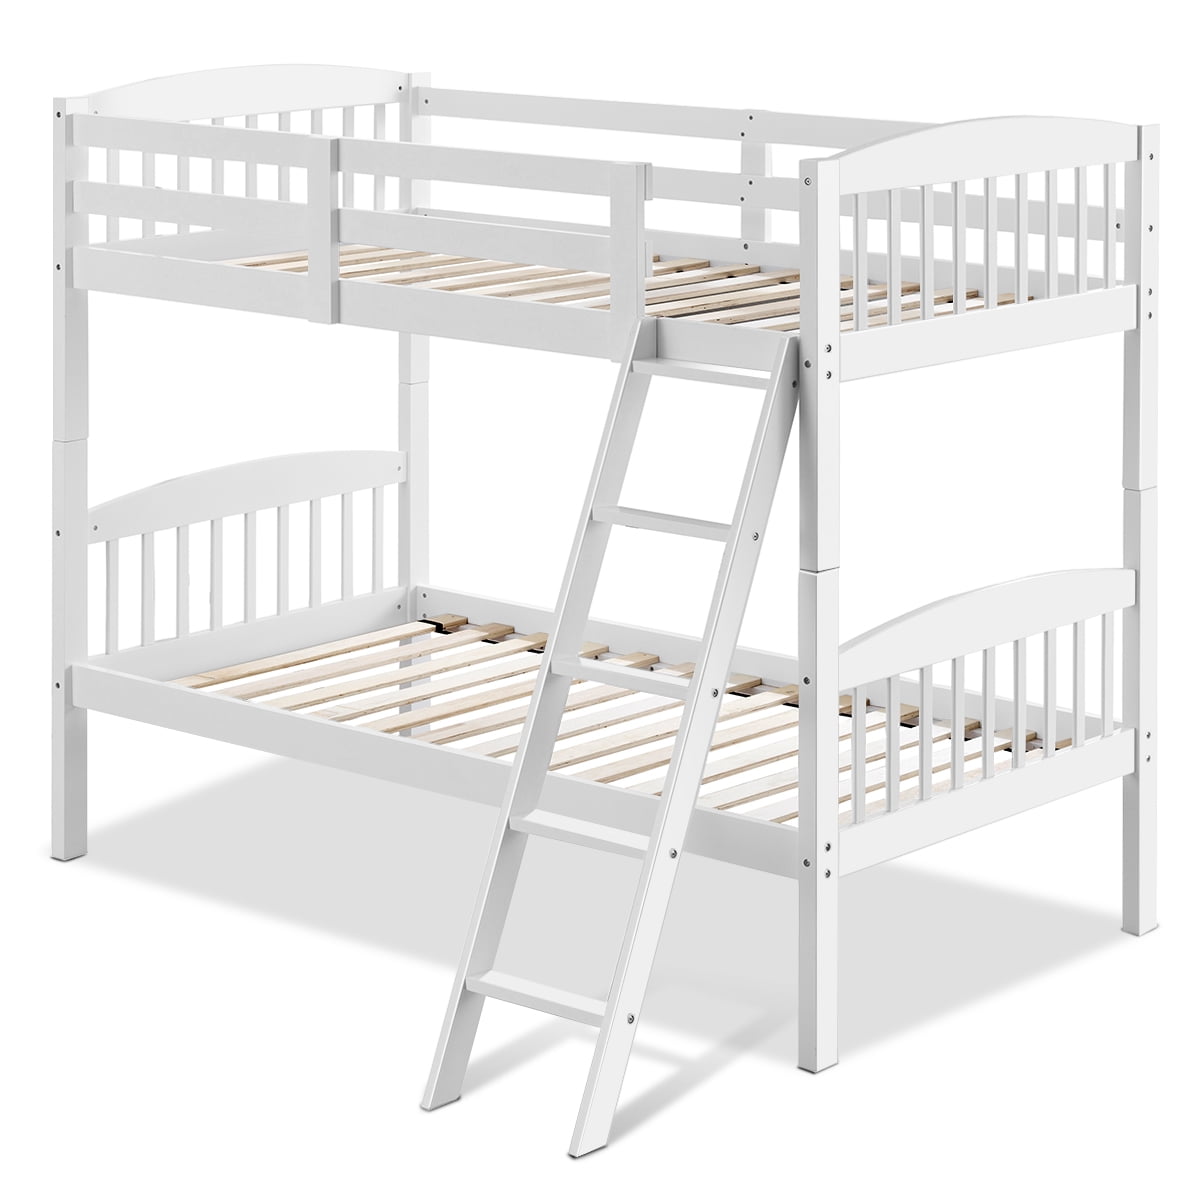 Details about   Wooden Twin Over Twin Bunk Bed Convertible 2 Individual Twin Room Espresso White 